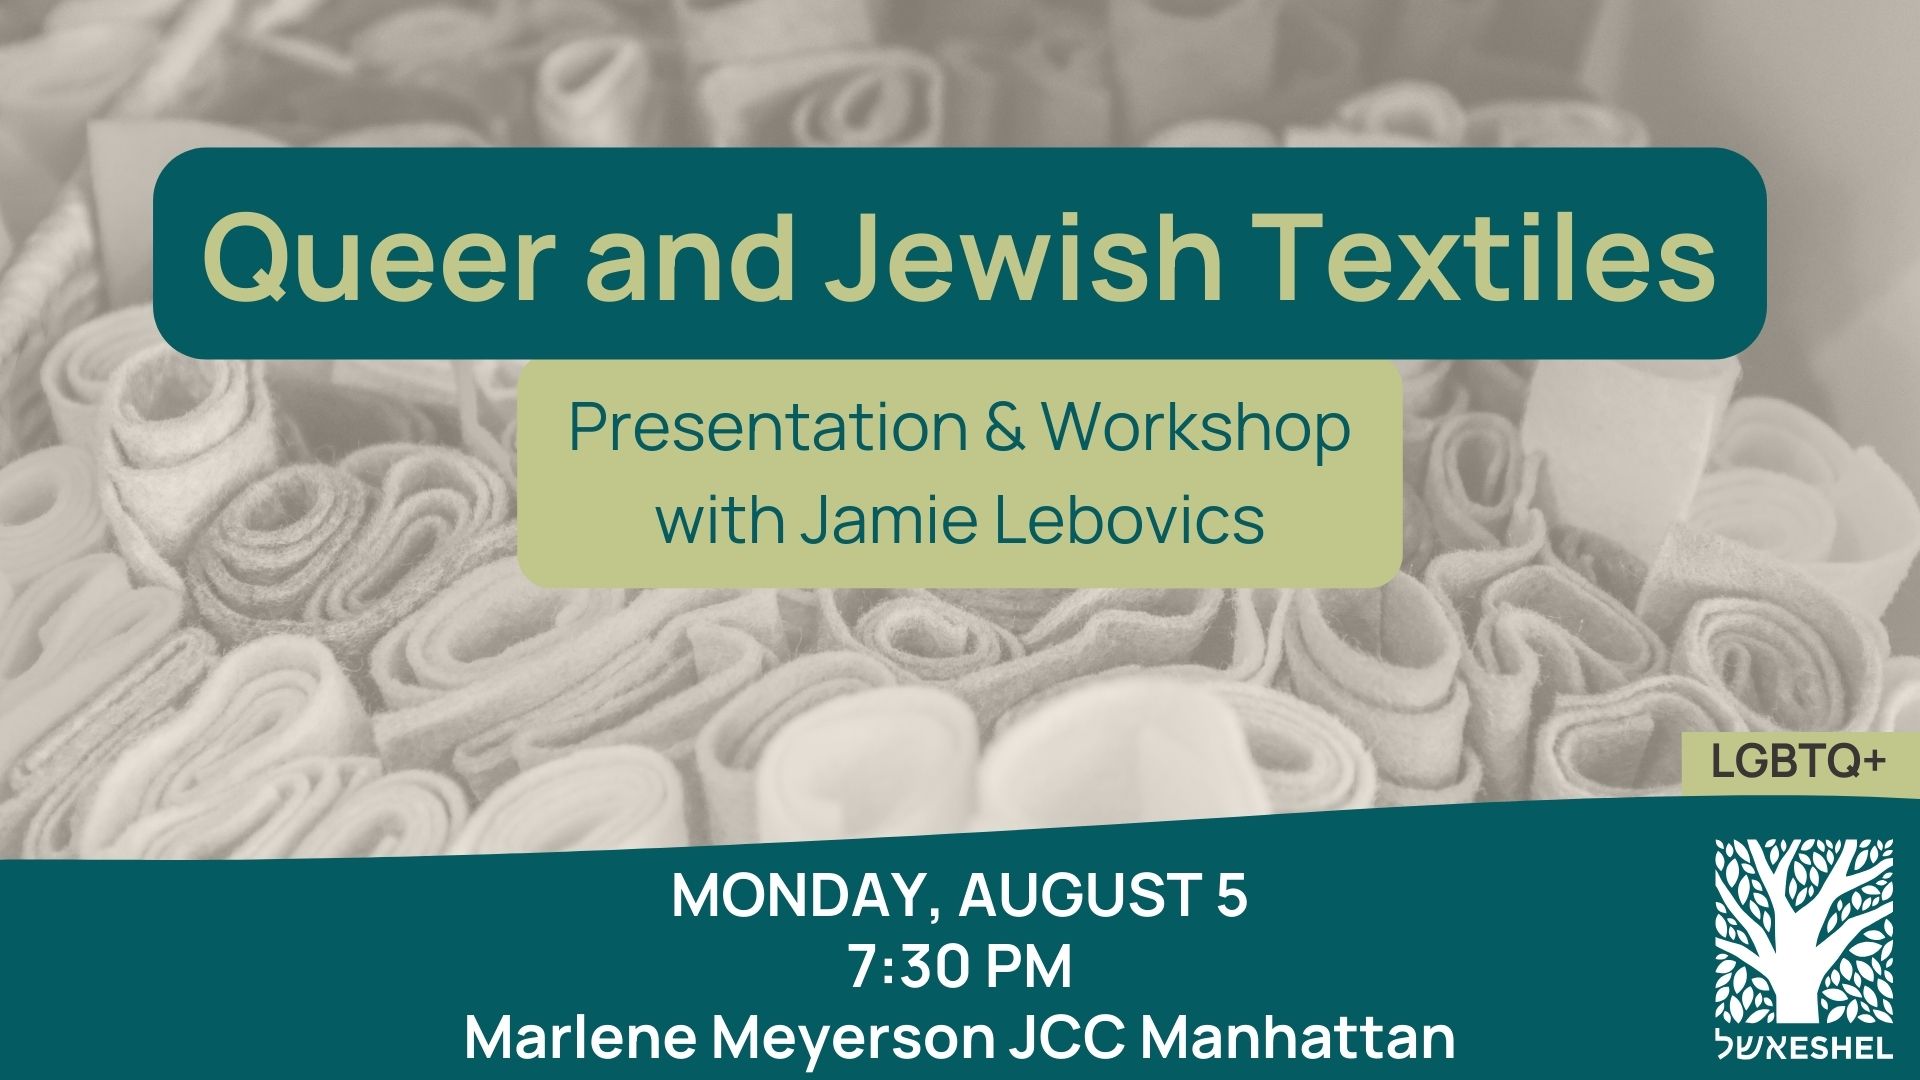 Queer and Jewish Textiles: Presentation and Workshop with Jamie Lebovics | Monday, August 5 at 7:30pm at Marlene Myerson JCC Manhattan